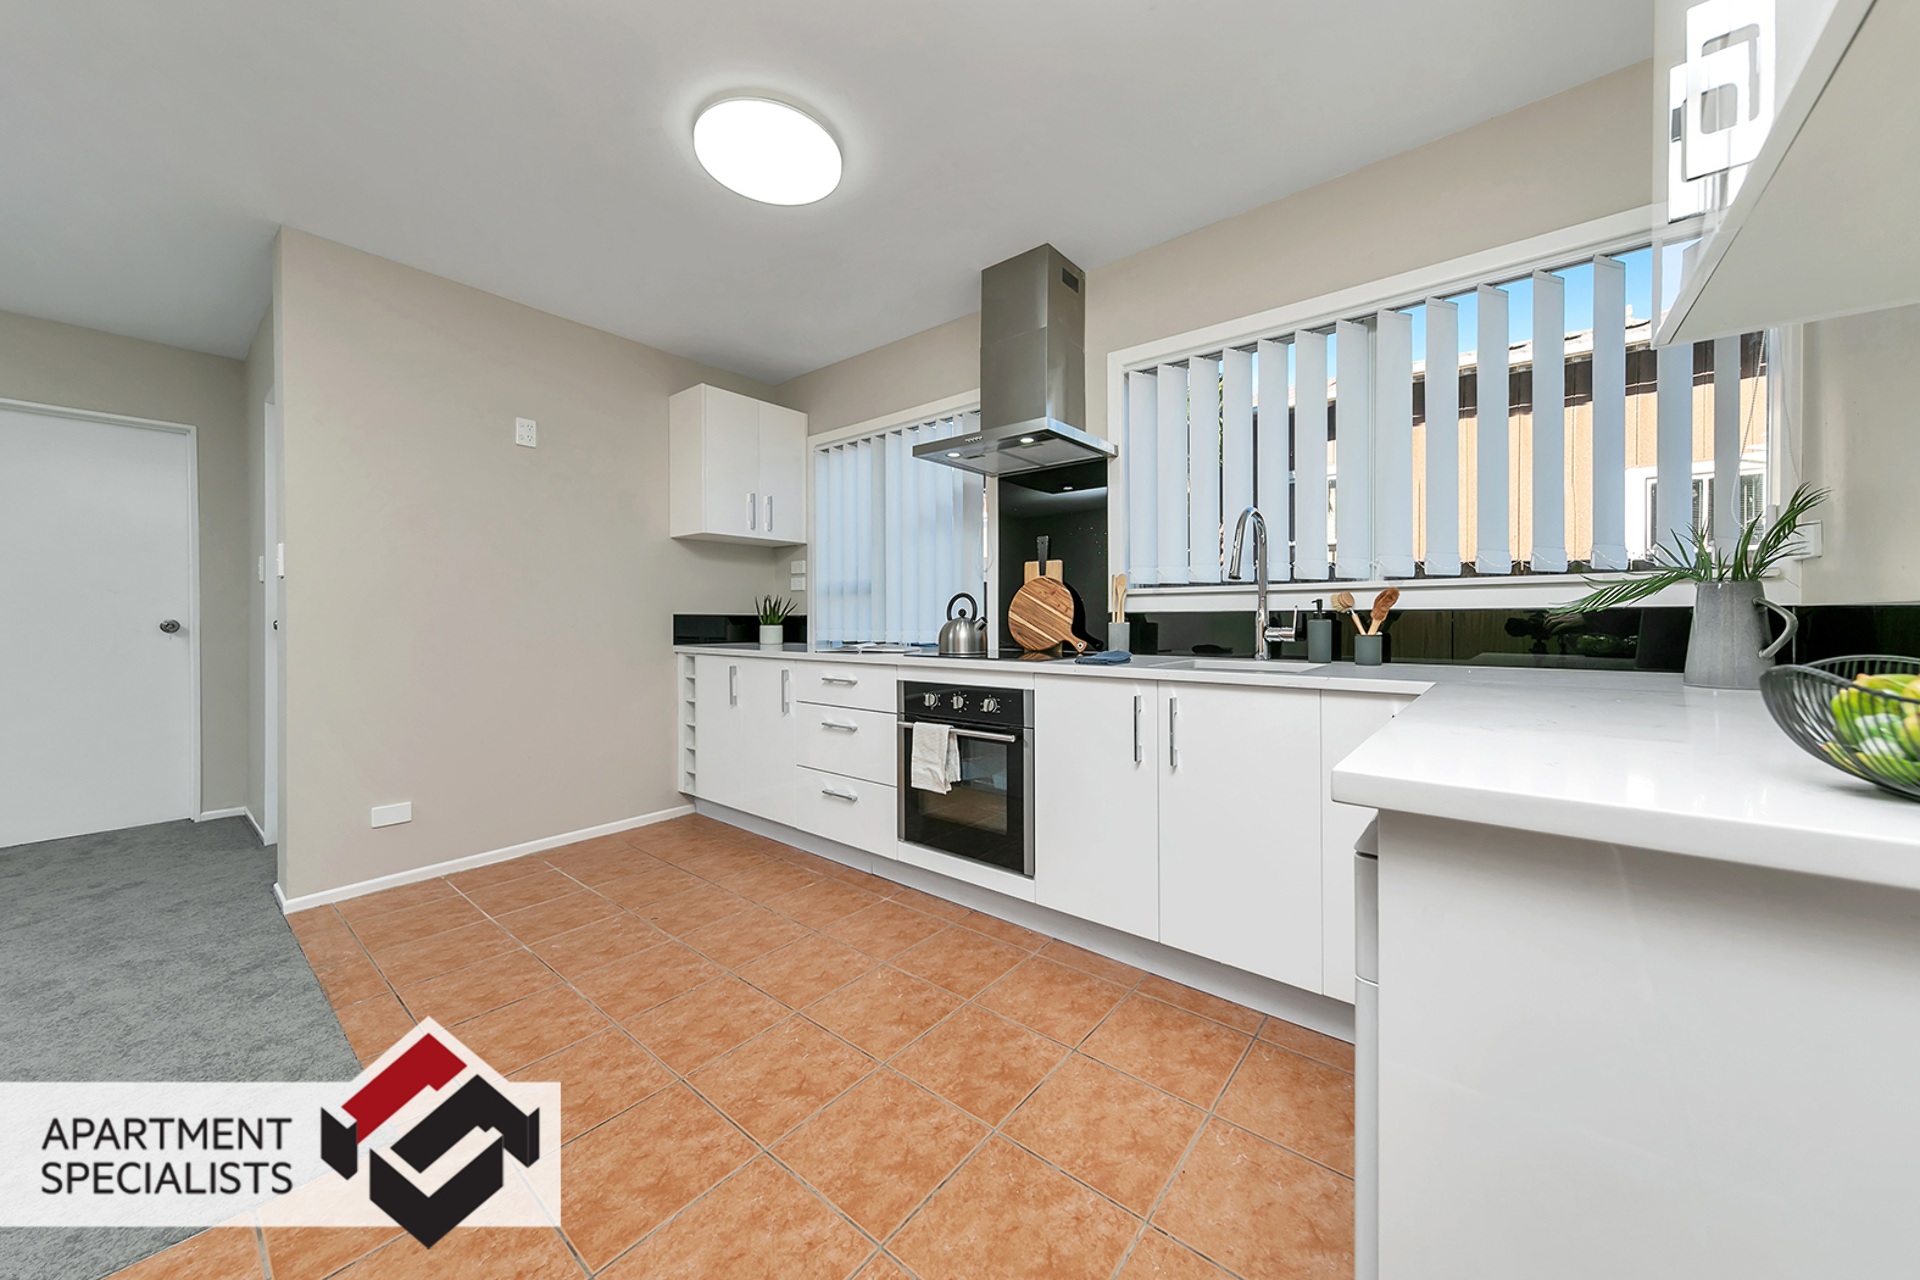 6 | 325 Mount Albert Road, Mount Roskill | Apartment Specialists